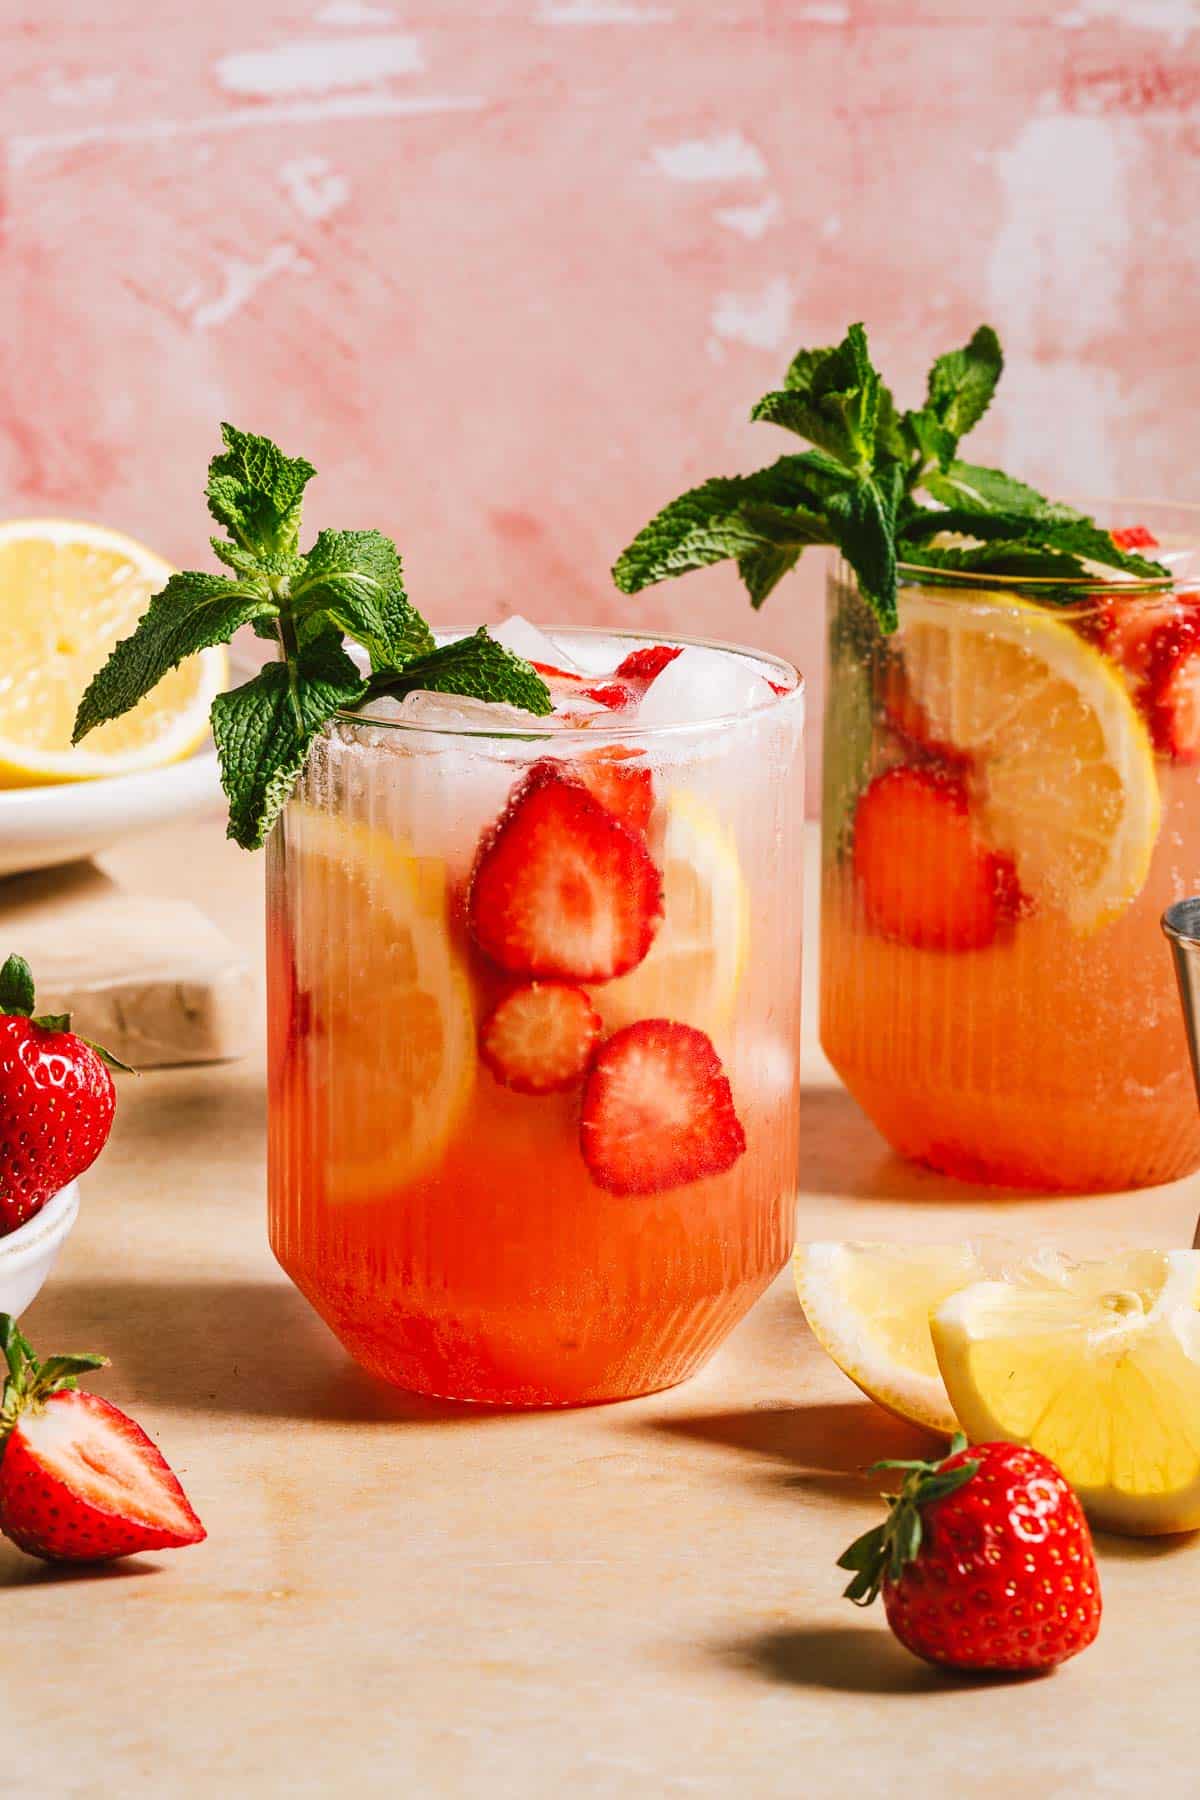 A hero shot image shows 2 glasses of strawberry vodka cocktails with slices of strawberries and lemon in the glass with sparking water,